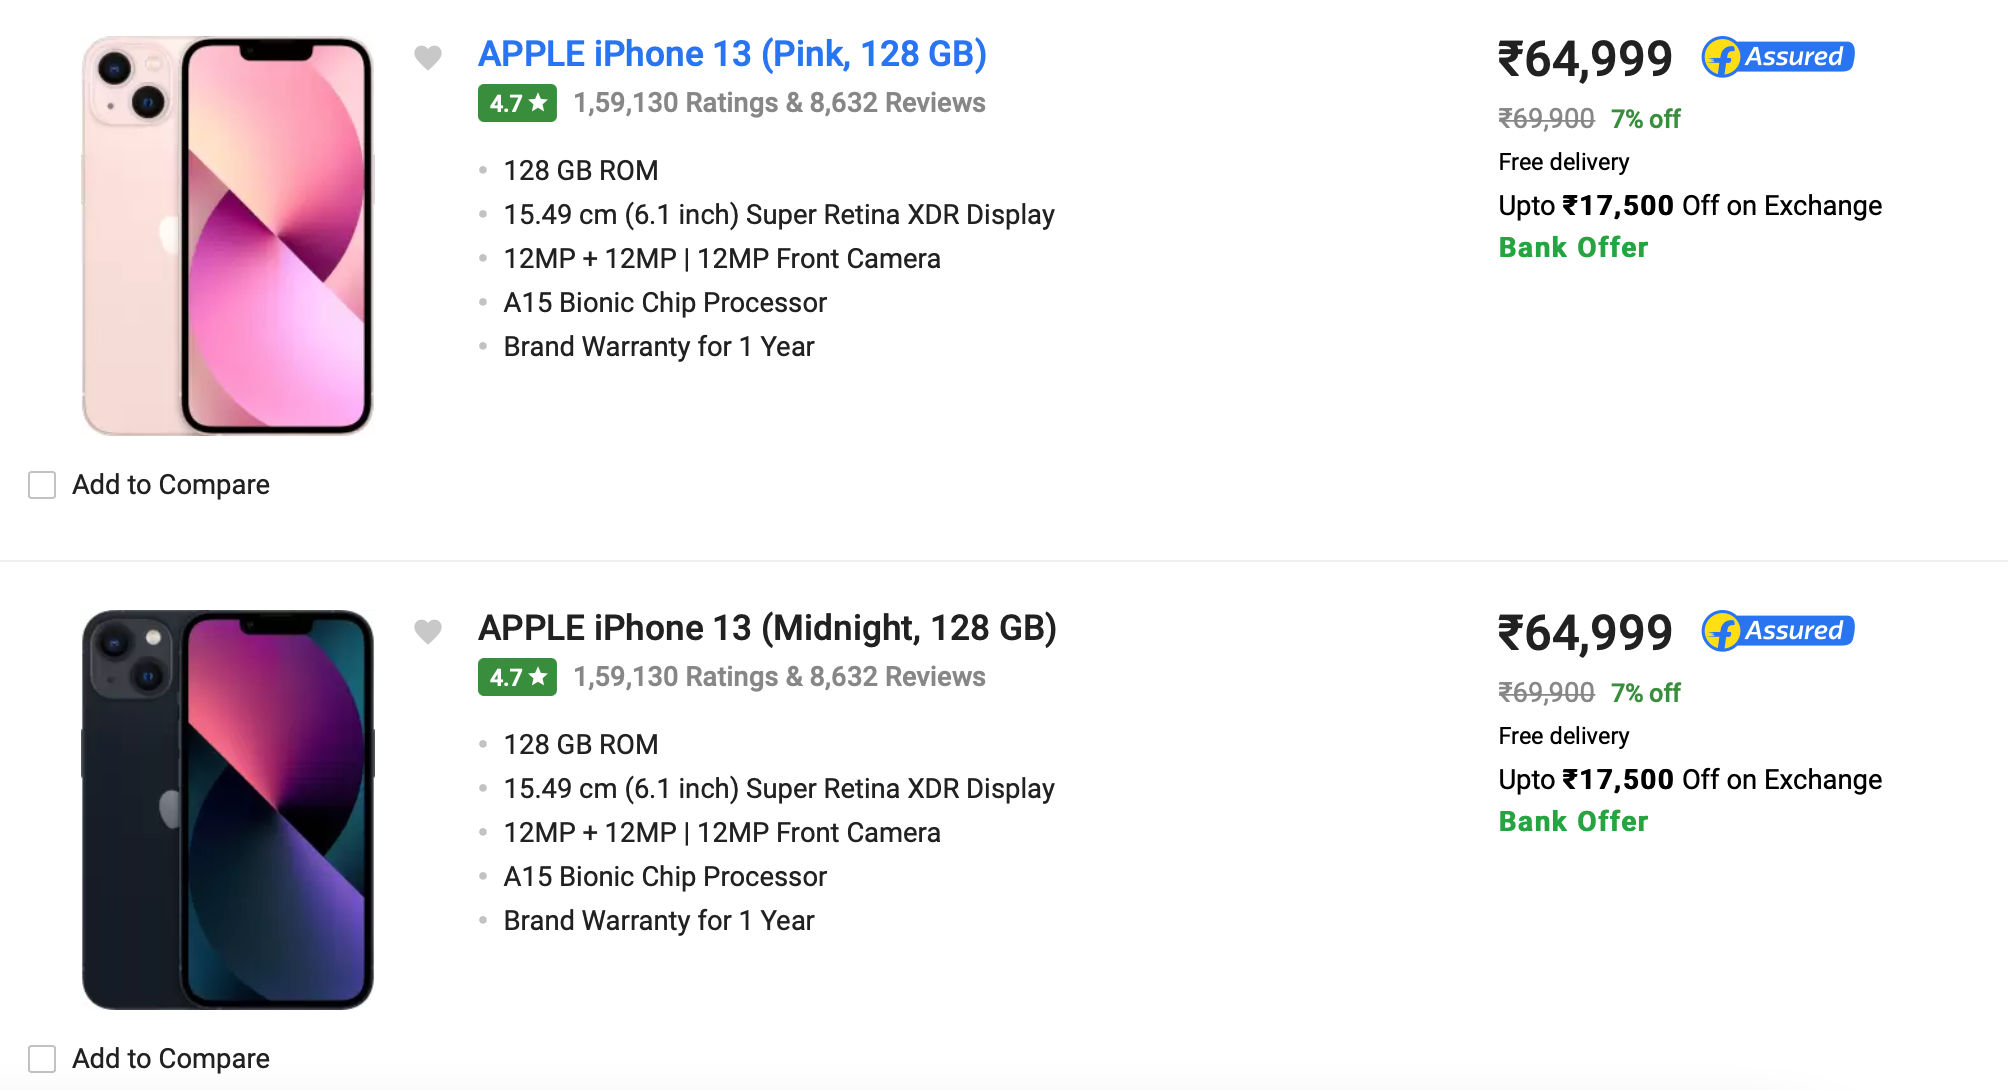 Flipkart Apple Days Sale Brings Iphone 12 Mini At Under Rs 40 000 Offers Iphone 13 With Flat Rs 5 000 Discount Mysmartprice